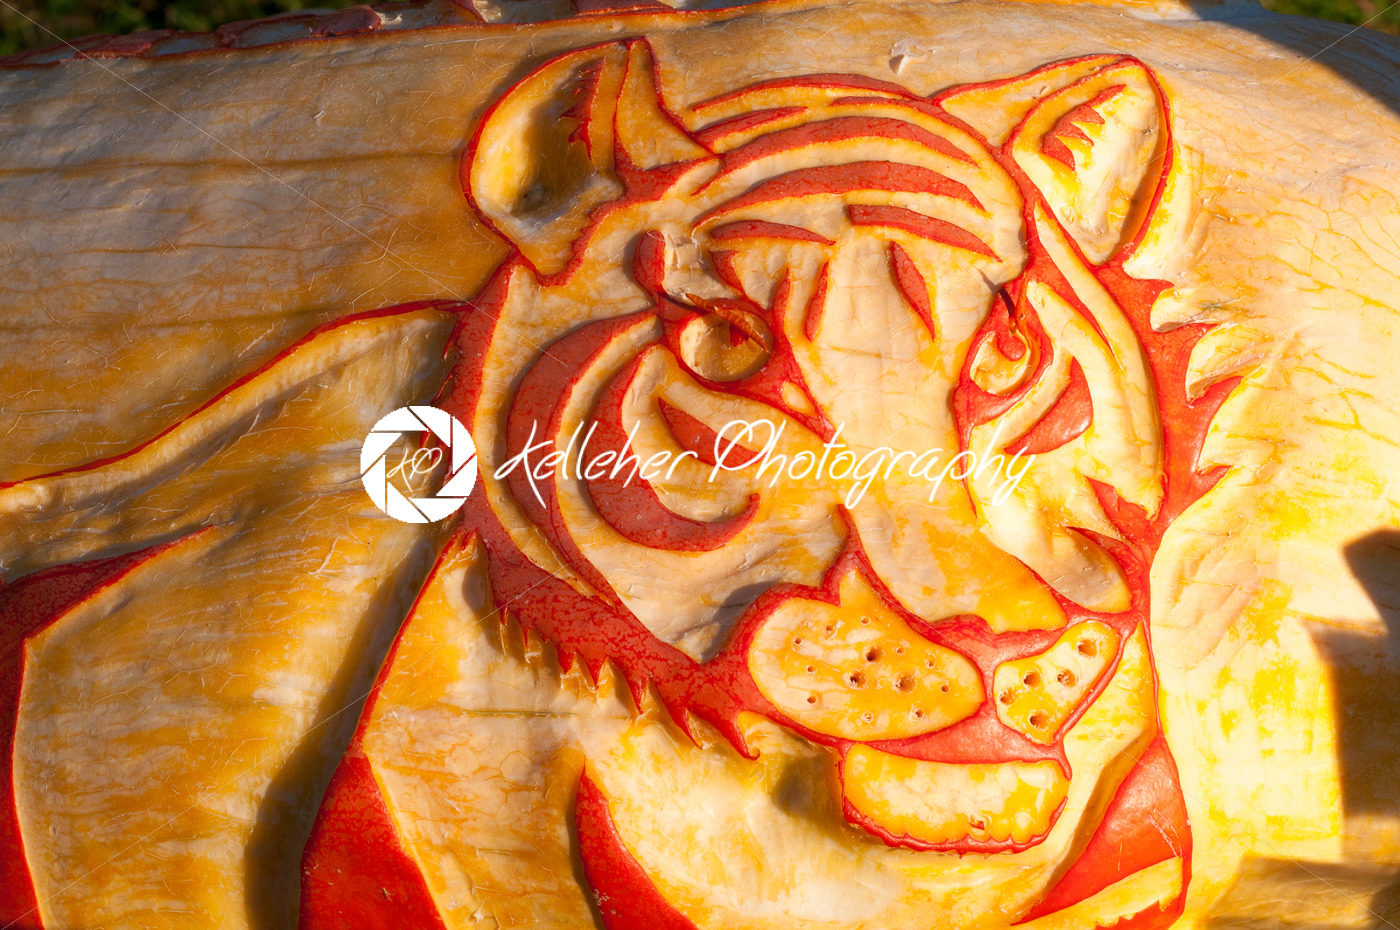 CHADDS FORD, PA – OCTOBER 26: Tiger Pumpkin at The Great Pumpkin Carve carving contest on October 26, 2013 - Kelleher Photography Store